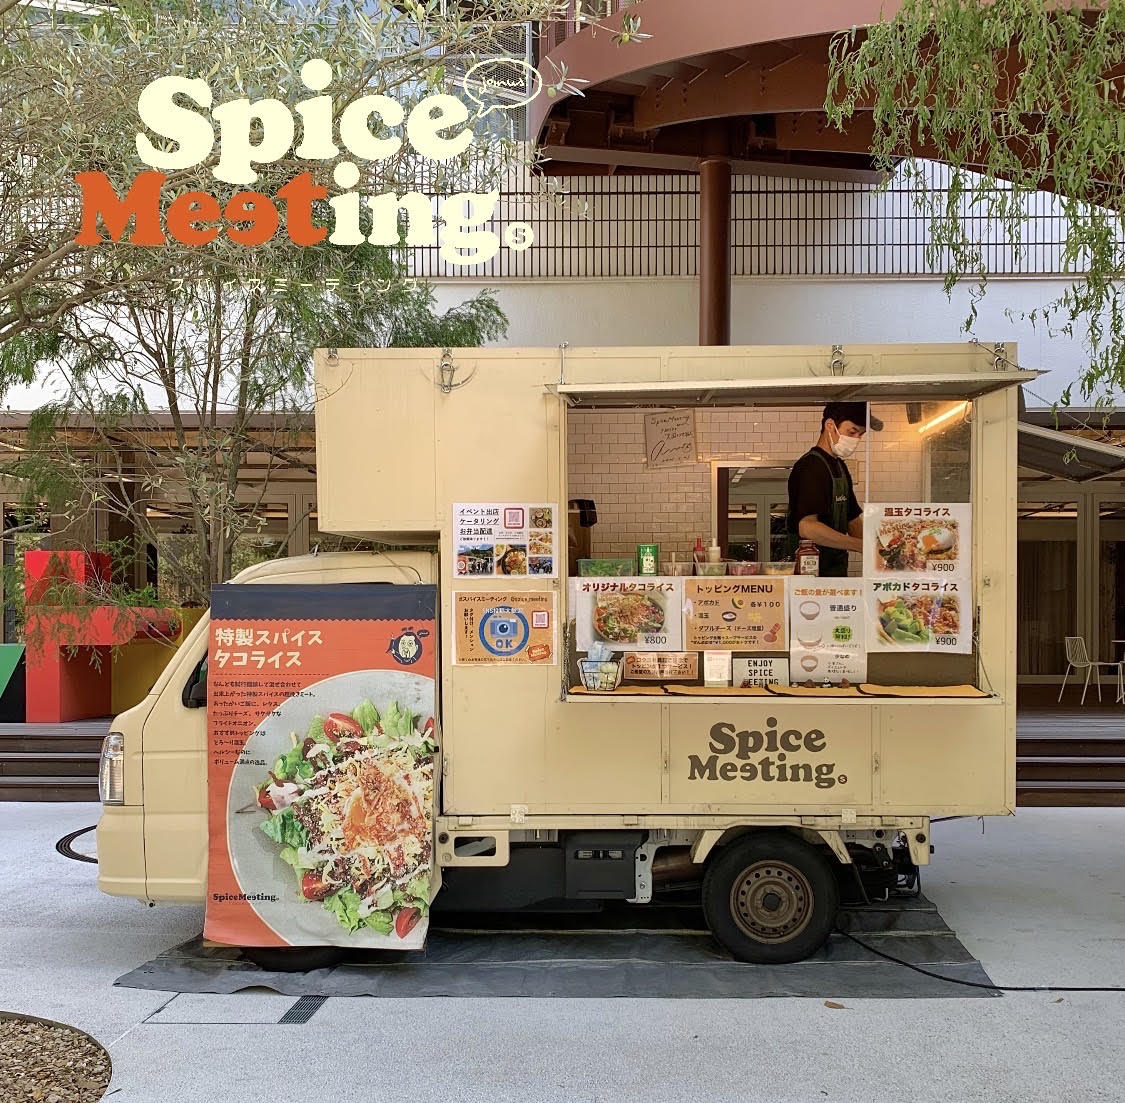 Spice Meeting